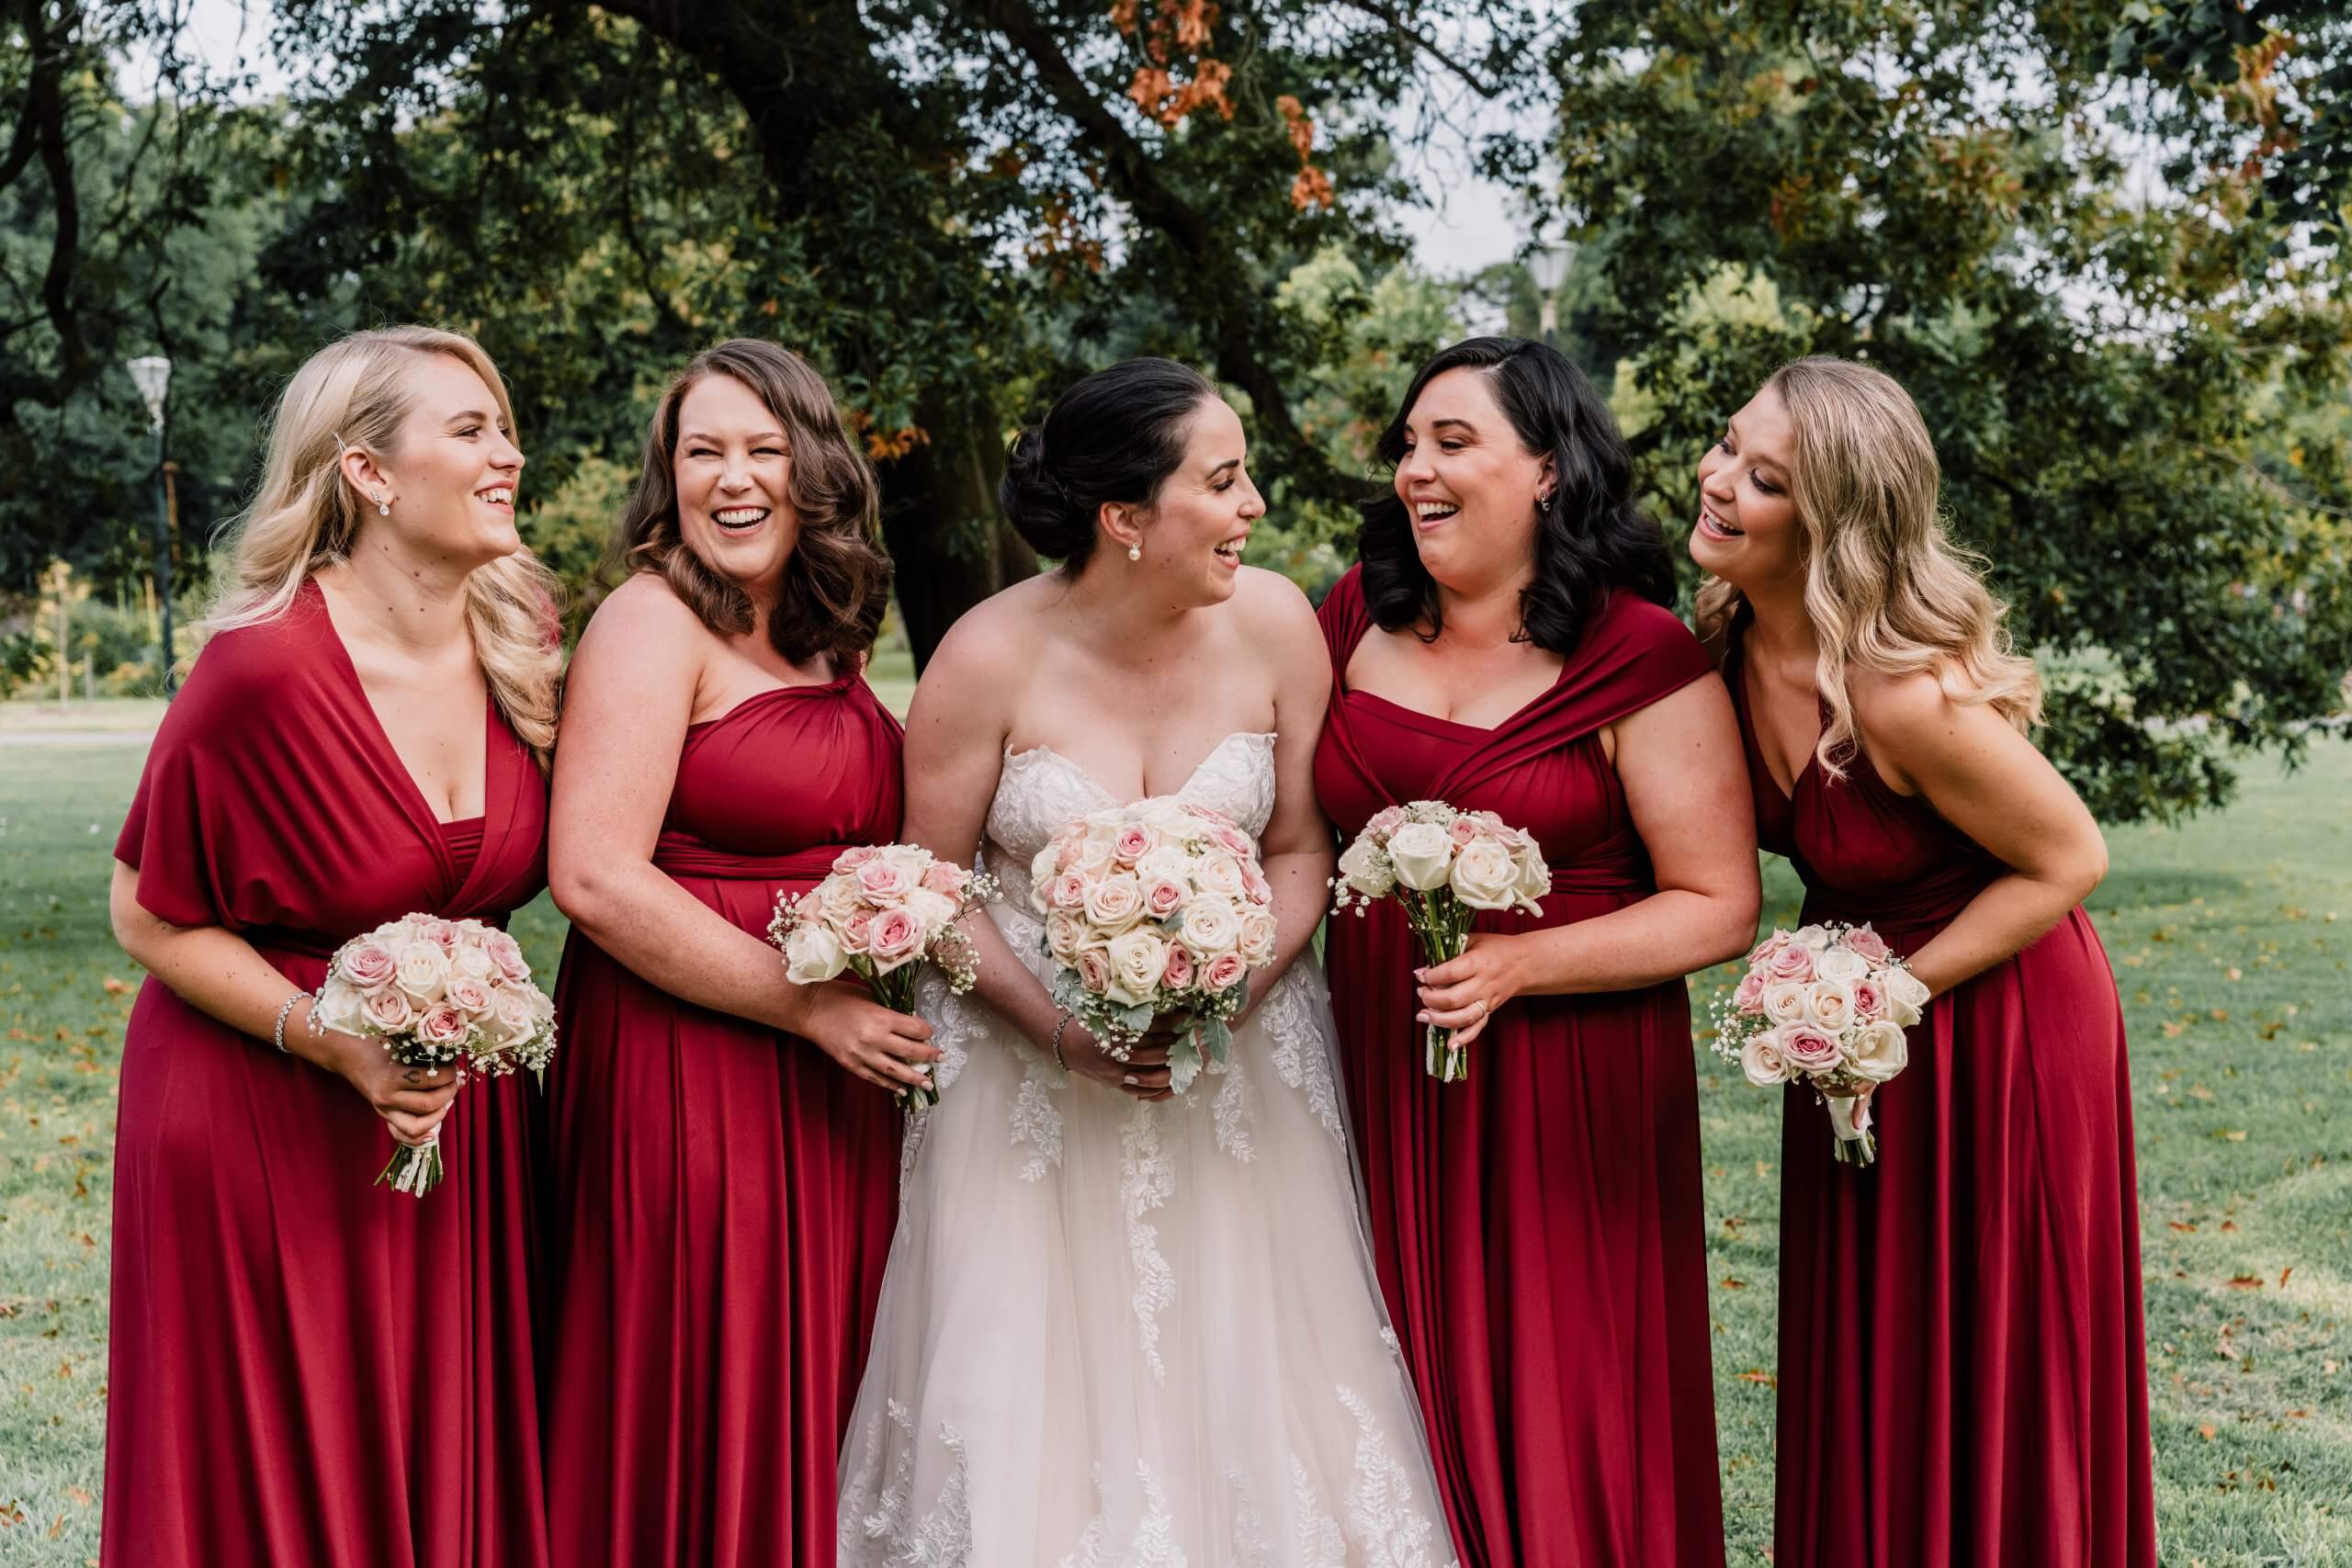 Beautiful candid shot of a bride and her four magenta-dressed bridesmaids.